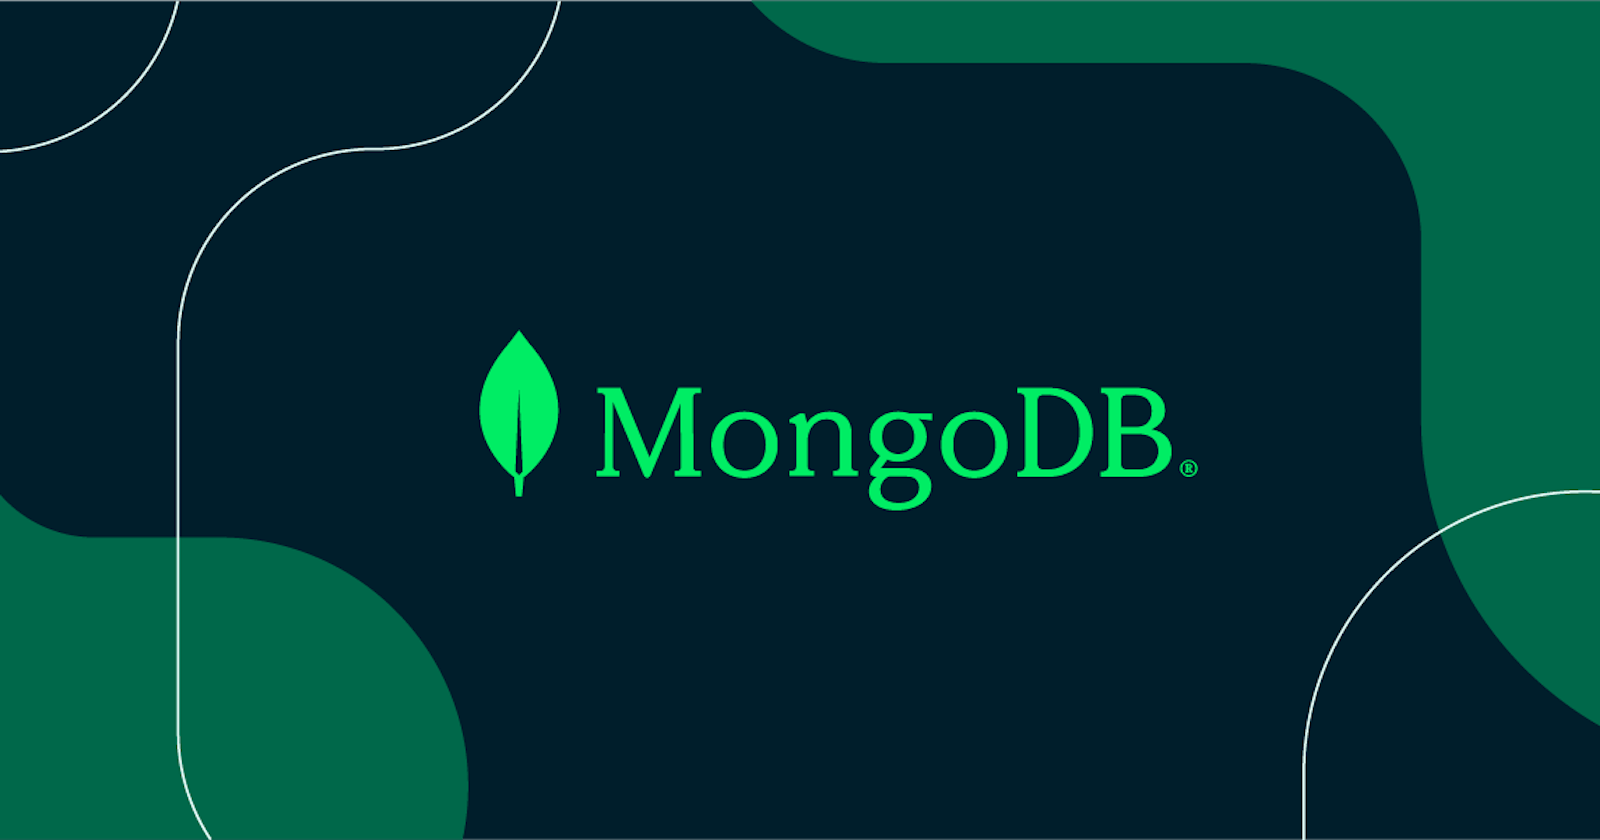 Introduction to MongoDB - Part 1